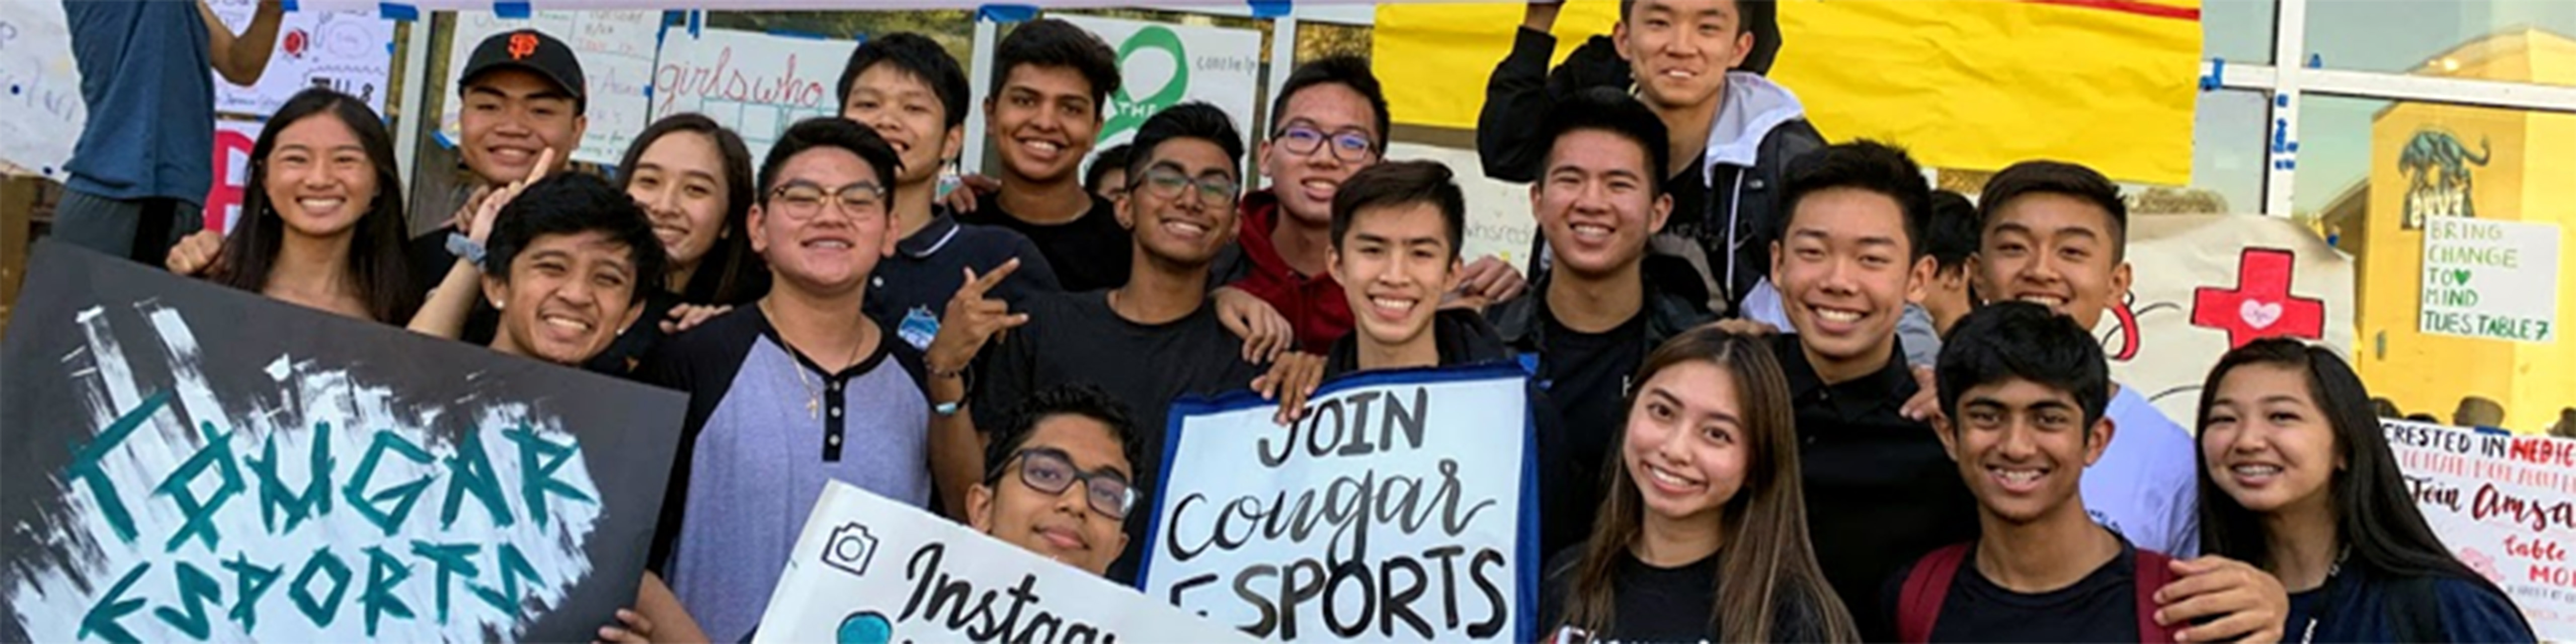 a group of teenage young men and young women from the Evergreen Valley High School e sports team holding up signs promoting e sports